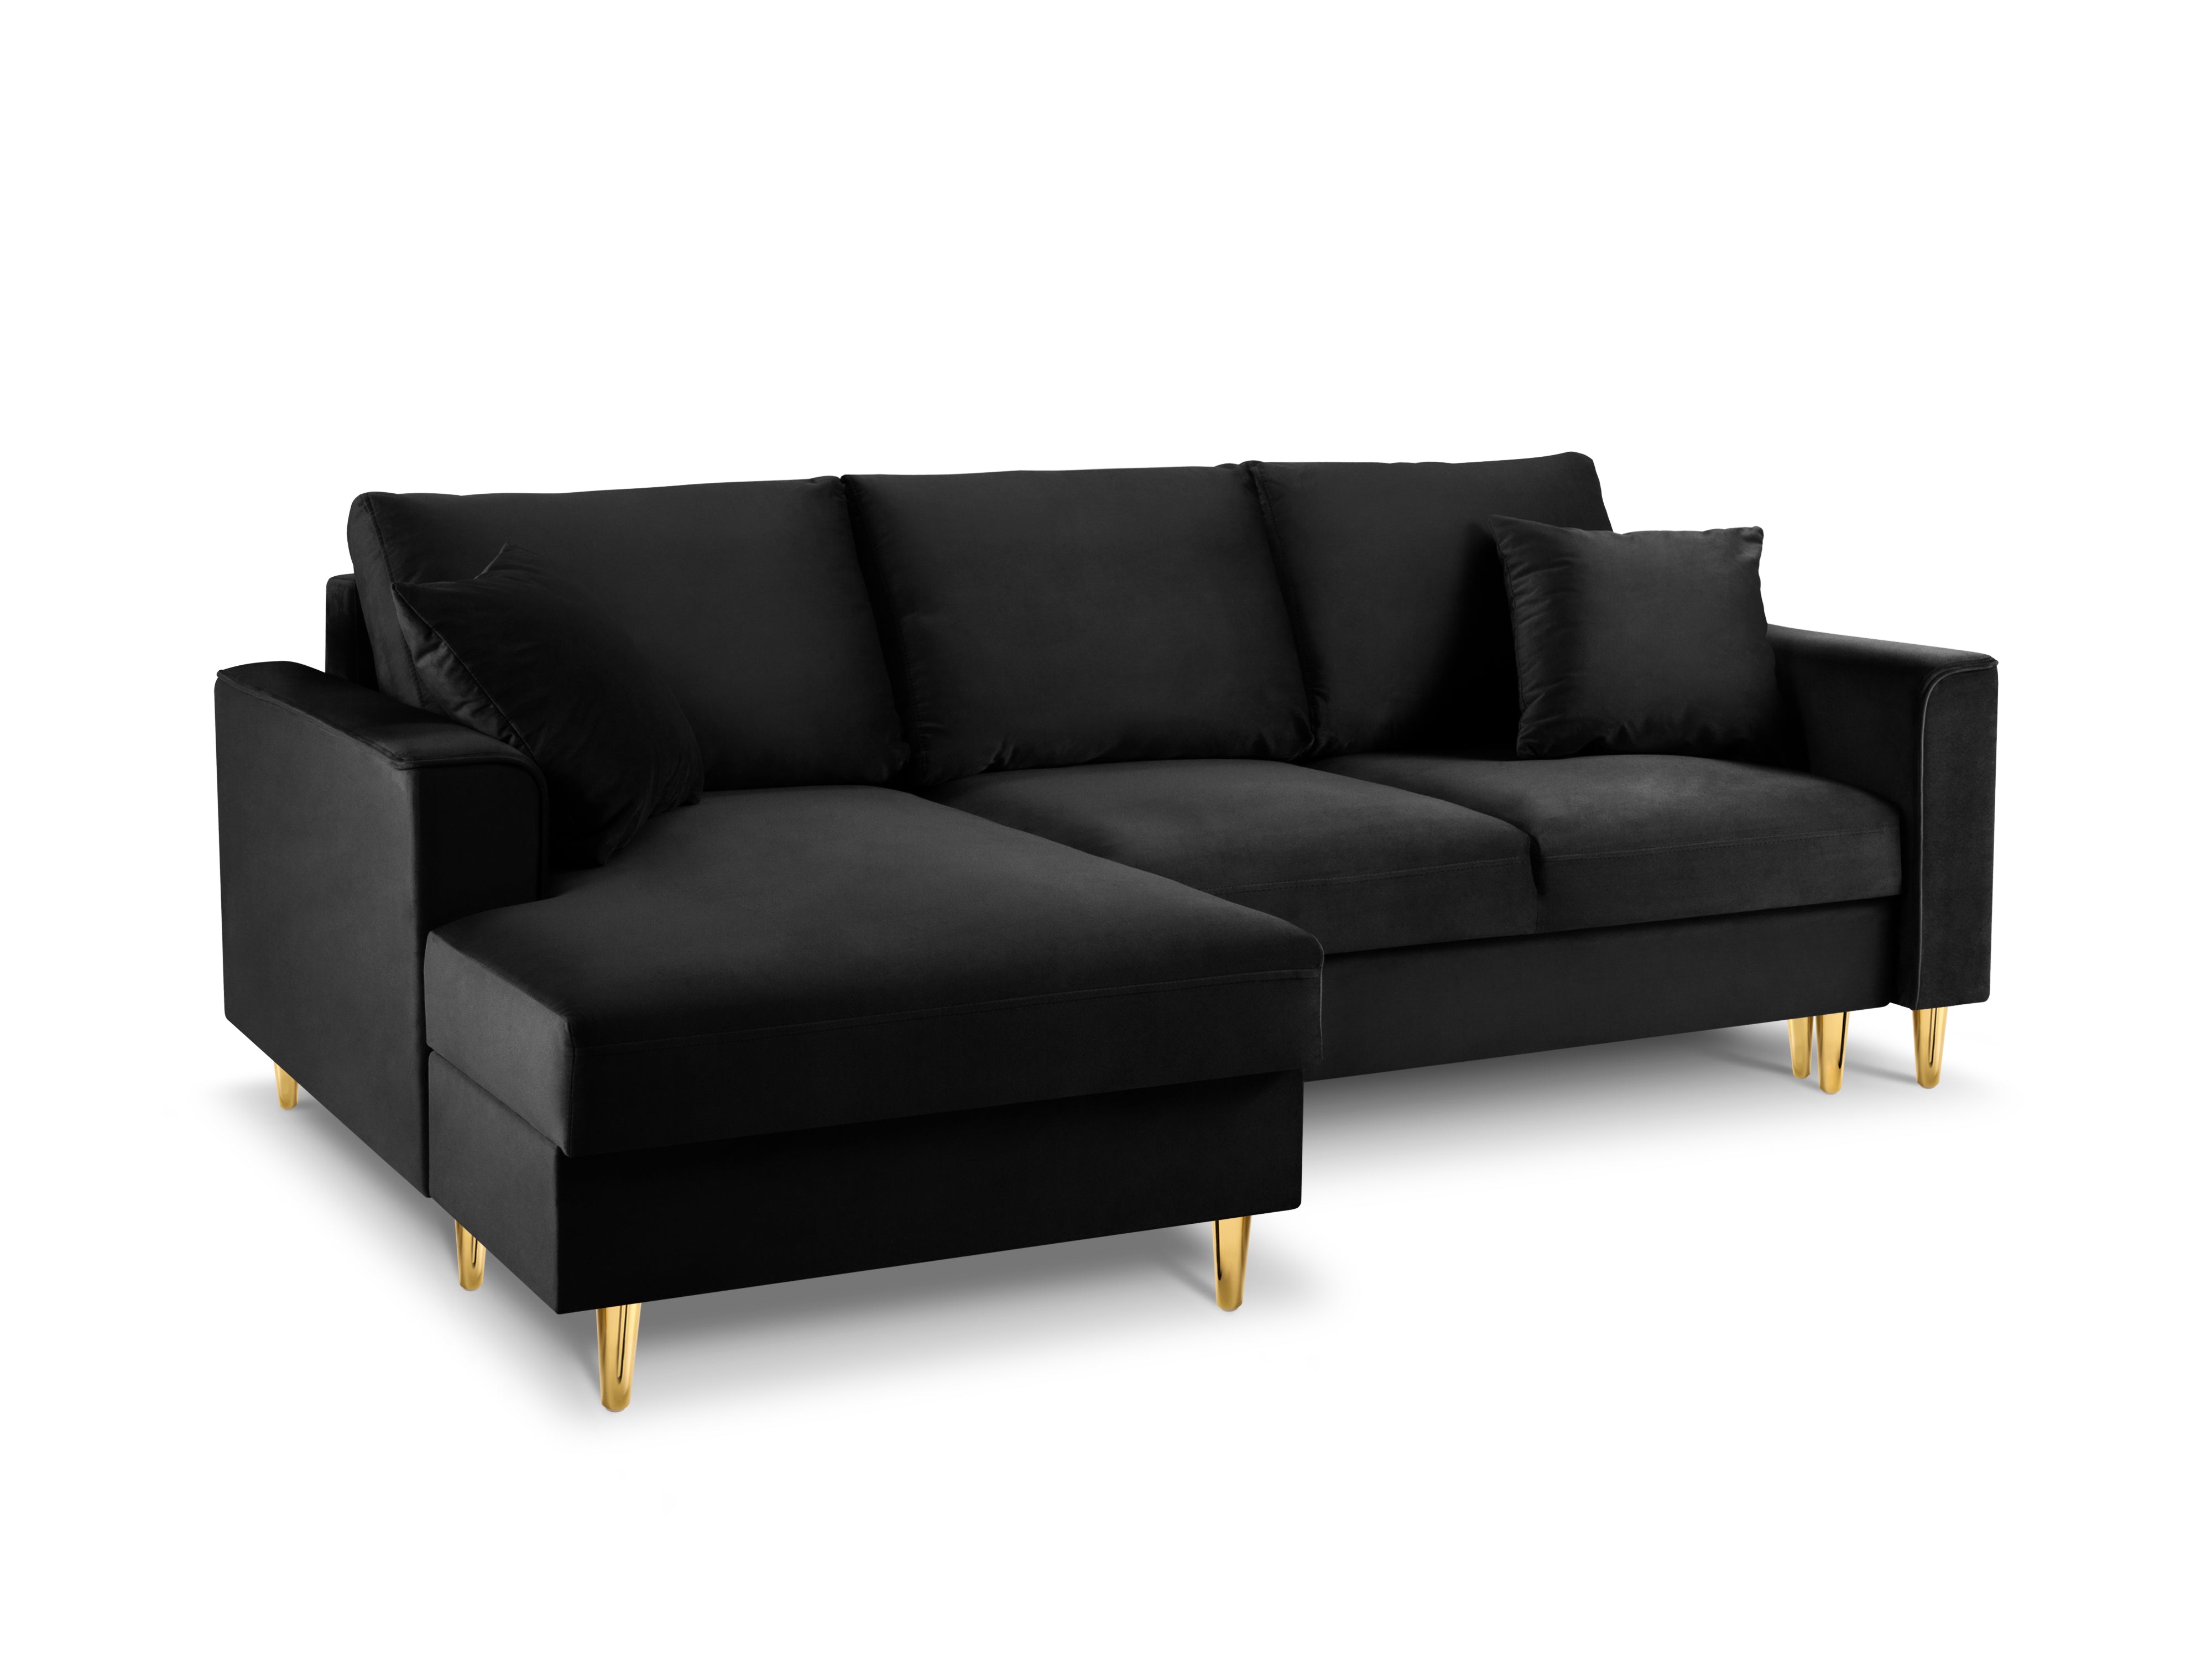 Velvet Left Corner Sofa With Bed Function And Box, "Cartadera", 4 Seats, 225x147x90
Made in Europe, Mazzini Sofas, Eye on Design